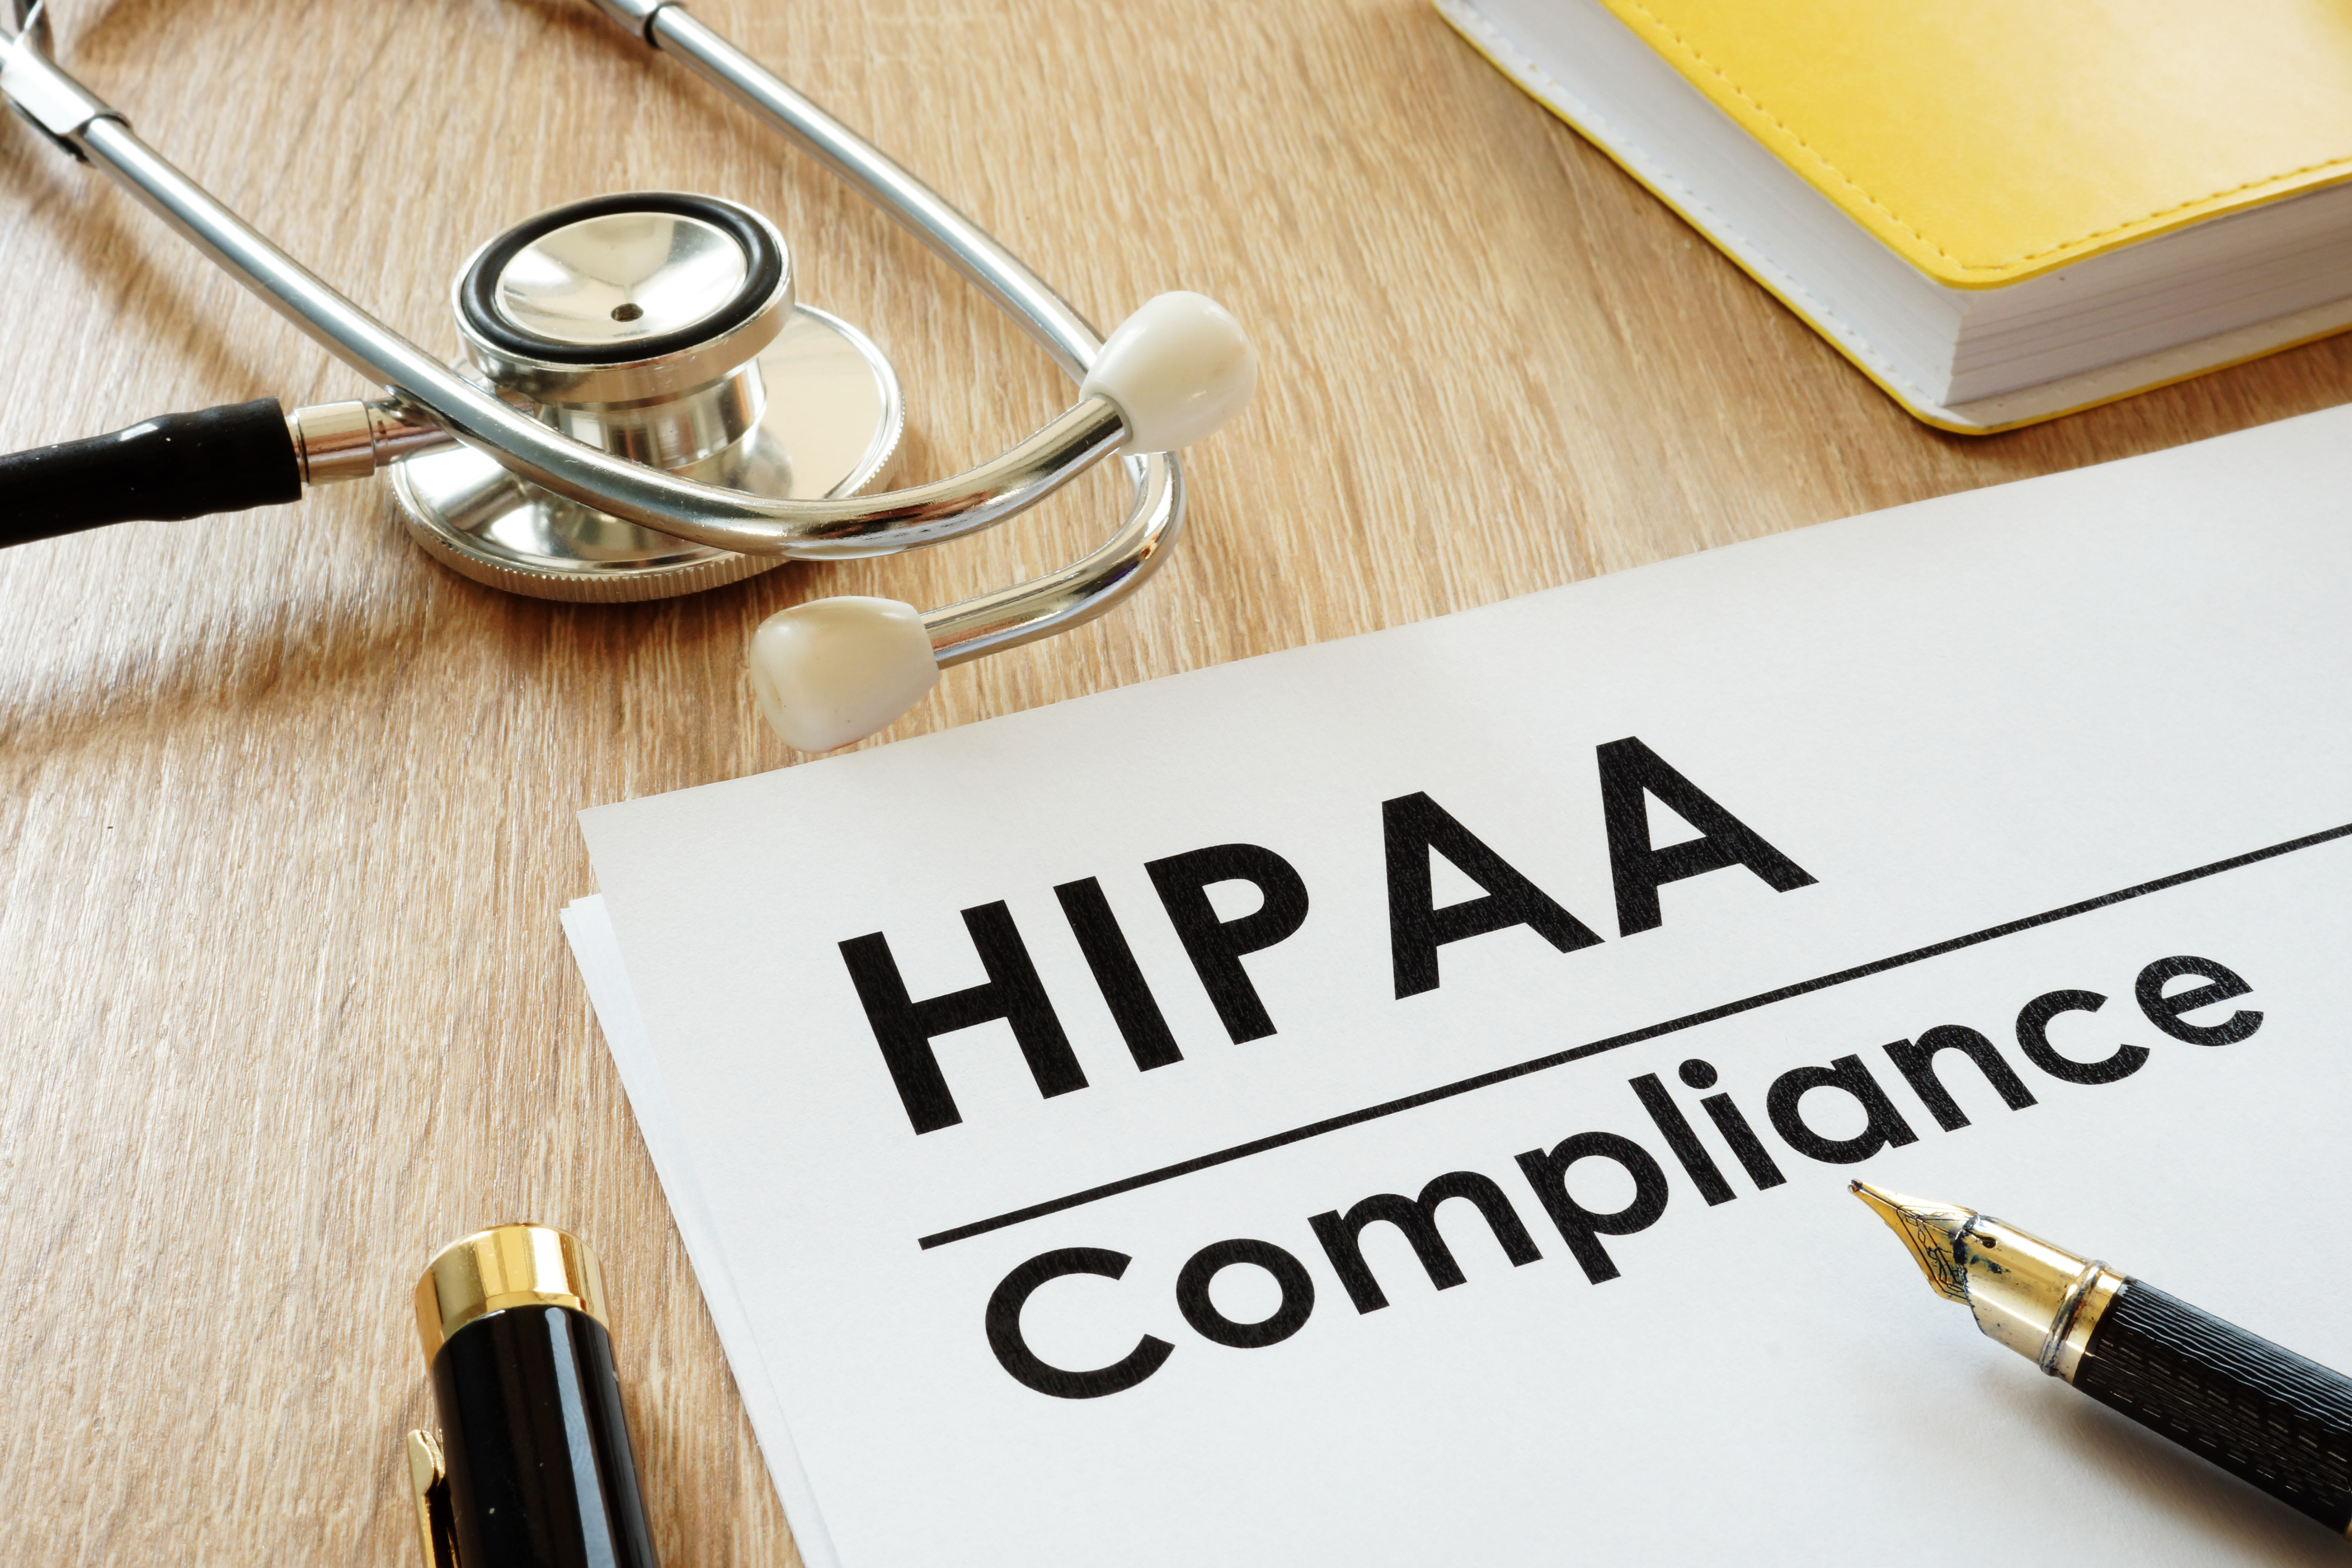 Complying with HIPAA standards is a must when integrating telehealth into your healthcare solution.